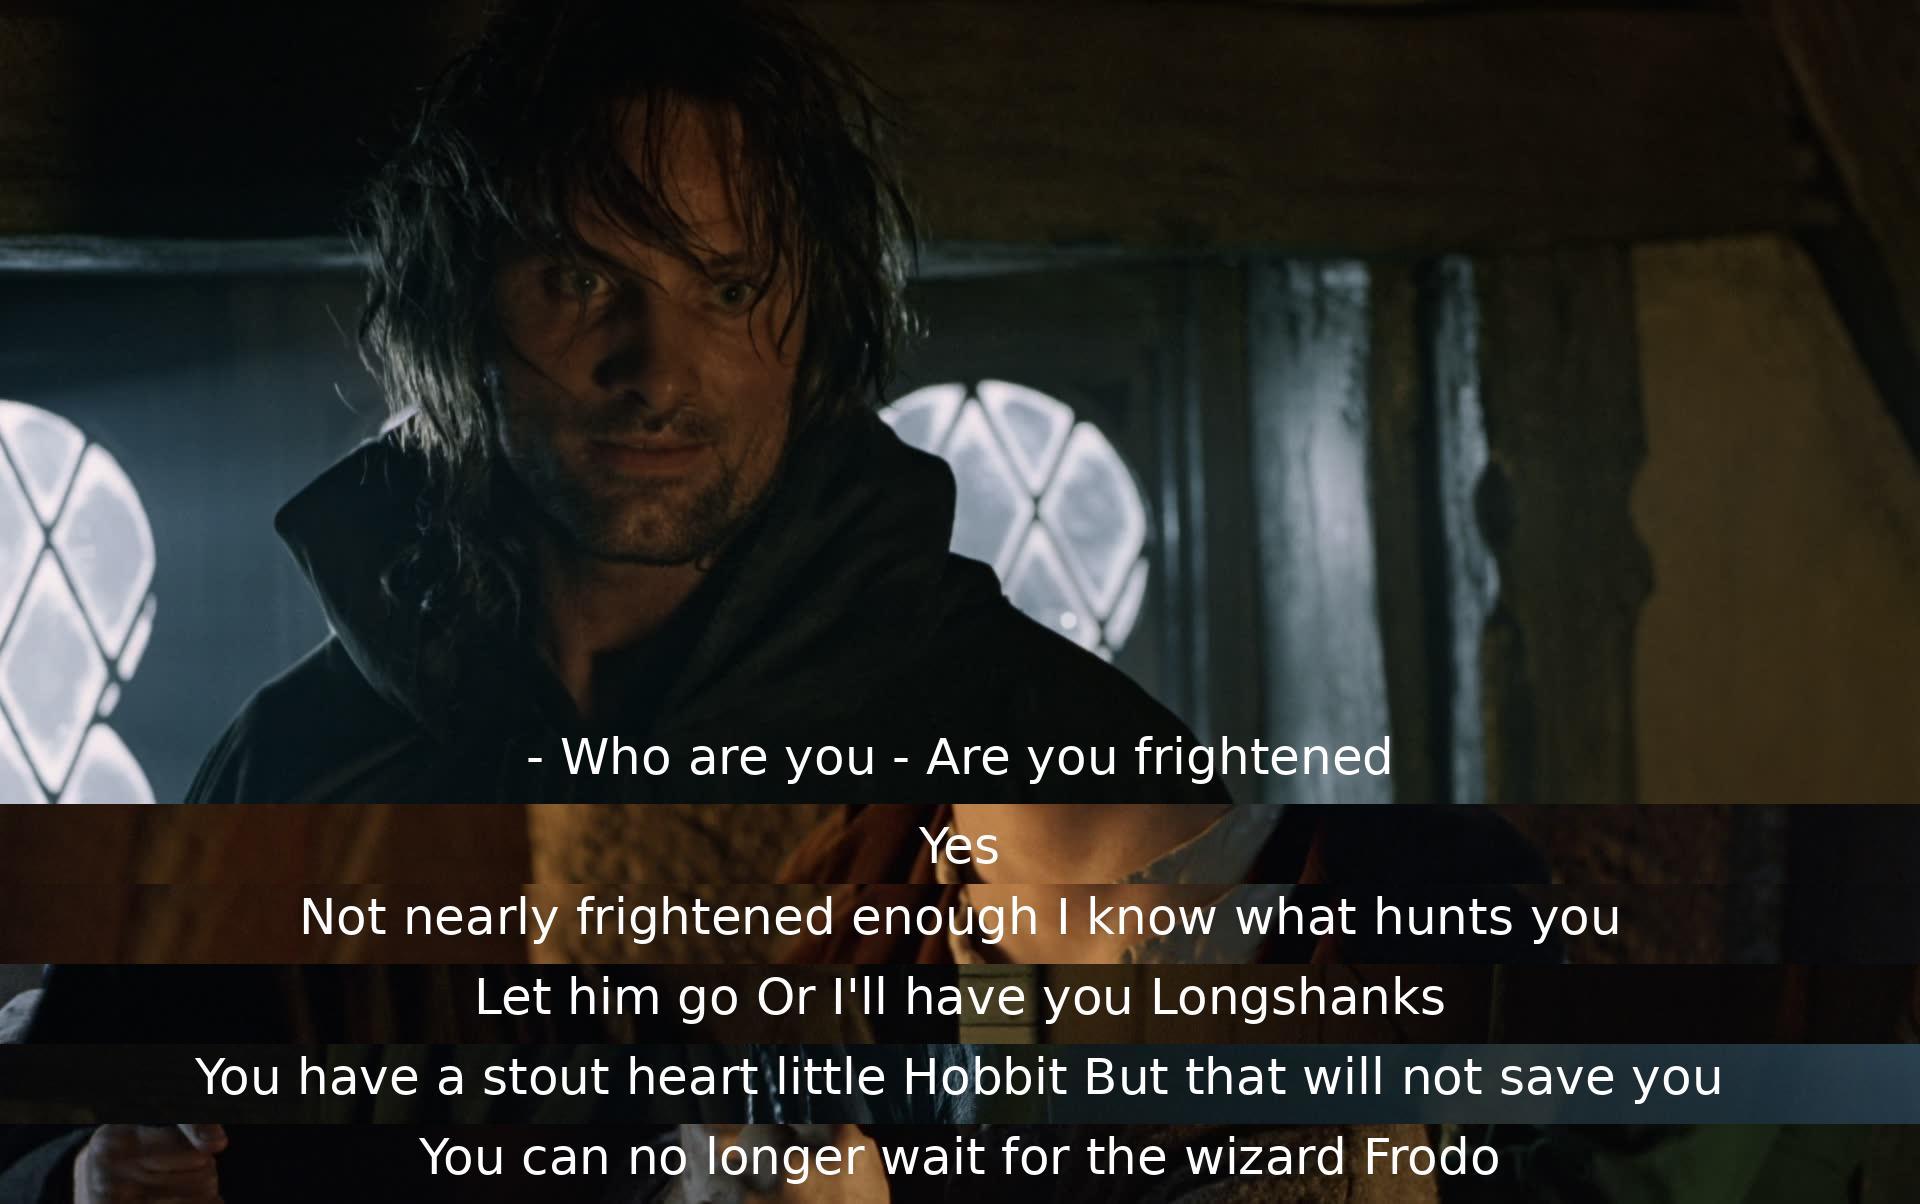 Two characters engage in a tense exchange where one warns the other about impending danger, insisting that they leave the wizard's side. The hobbit, though afraid, shows bravery but is ultimately told that they cannot depend solely on the wizard for protection.